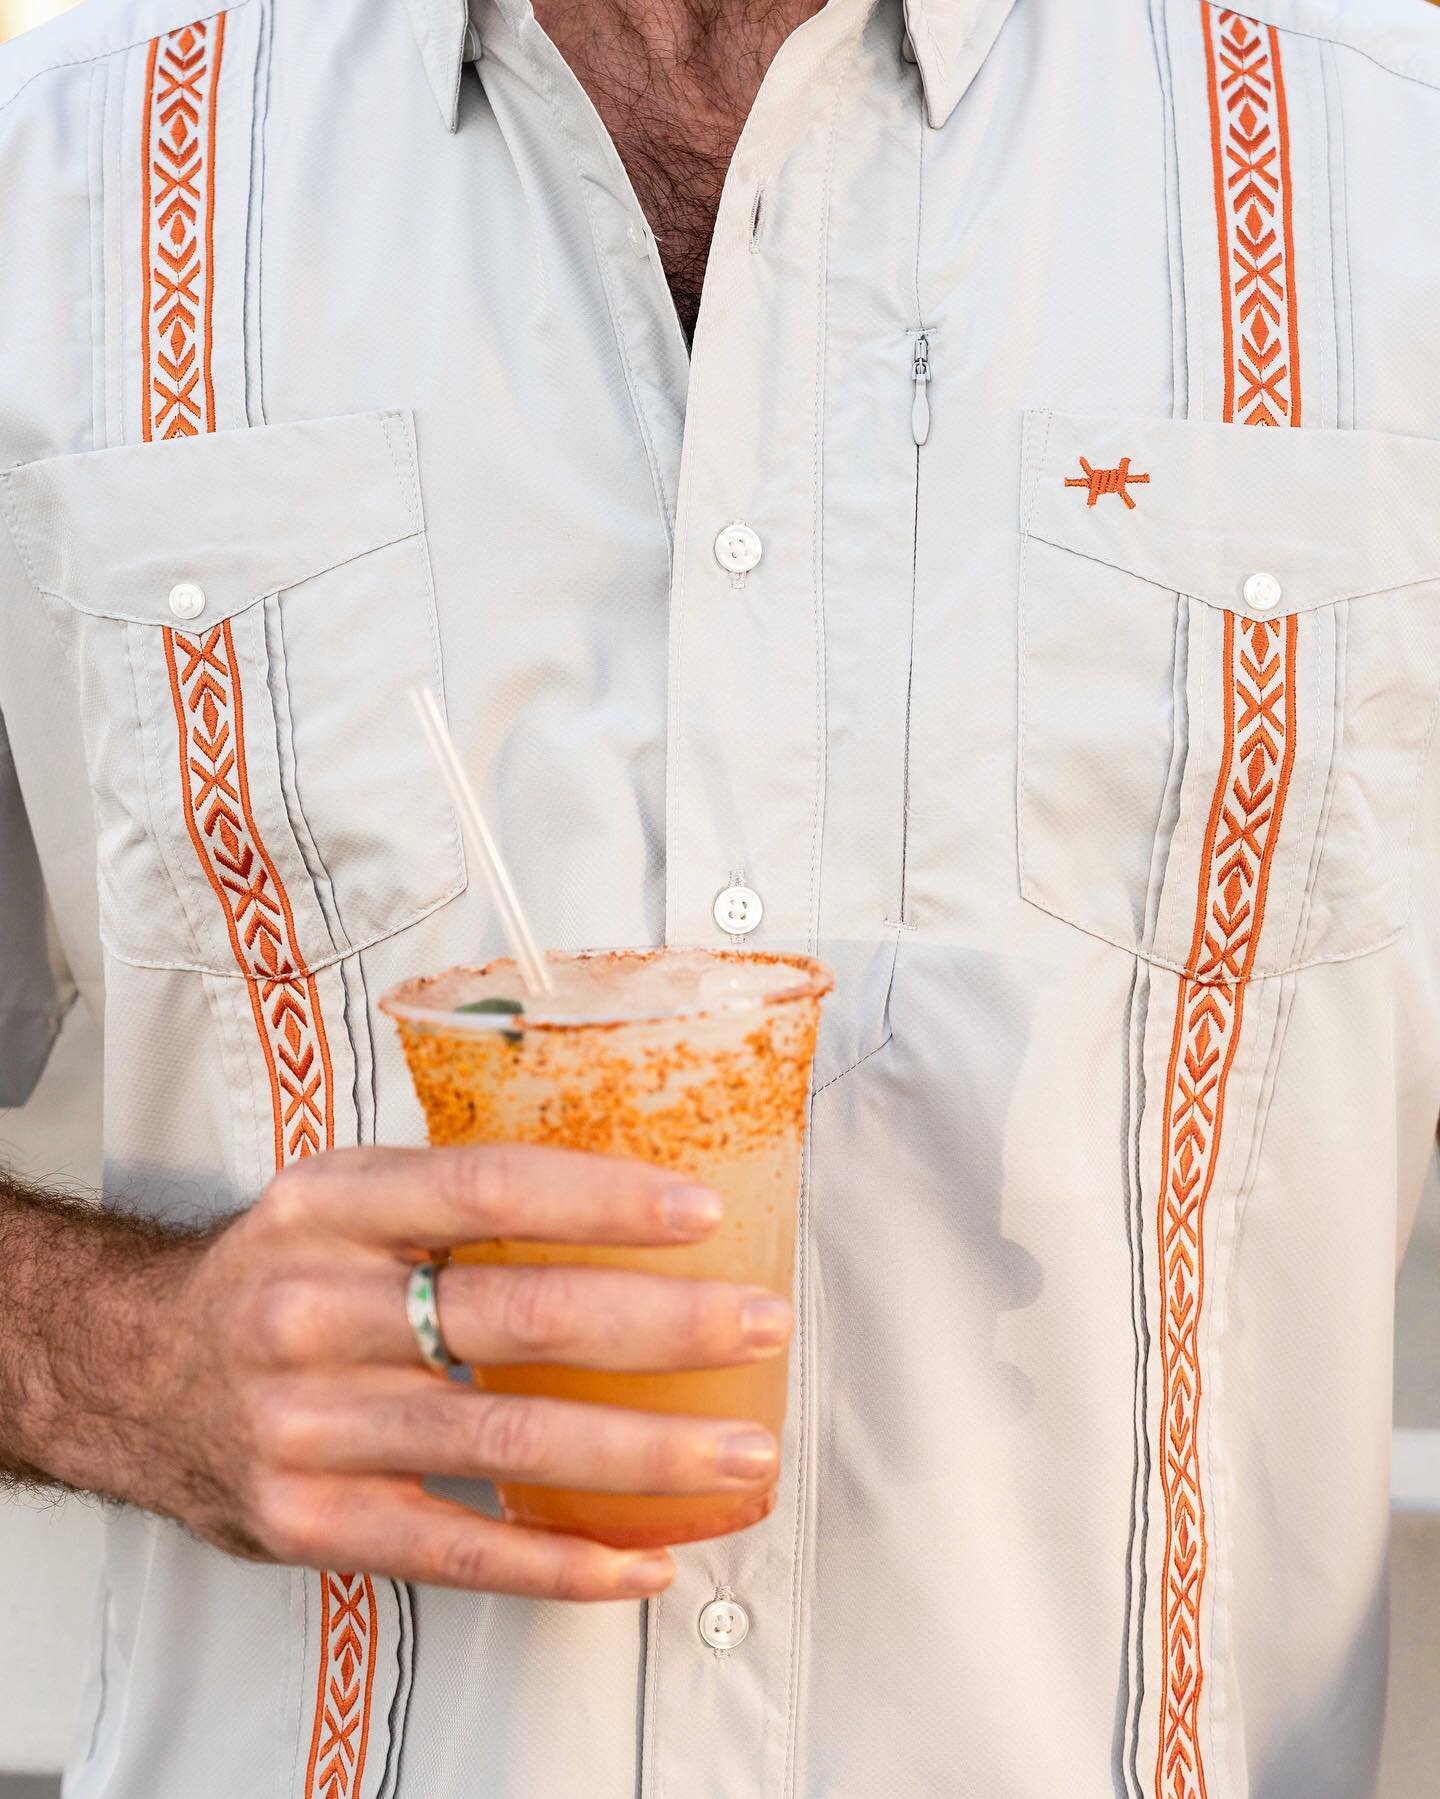 Guayabera meets Guadalupe! A fun afternoon out with @txstandard, properly outfitting the TX gentleman. Special thanks to @thegruenelightbar for letting us hang!

📸: @travperk_photo 
Models: @cal_cam @ryanonymous_ 

*video edits en route with @sethre